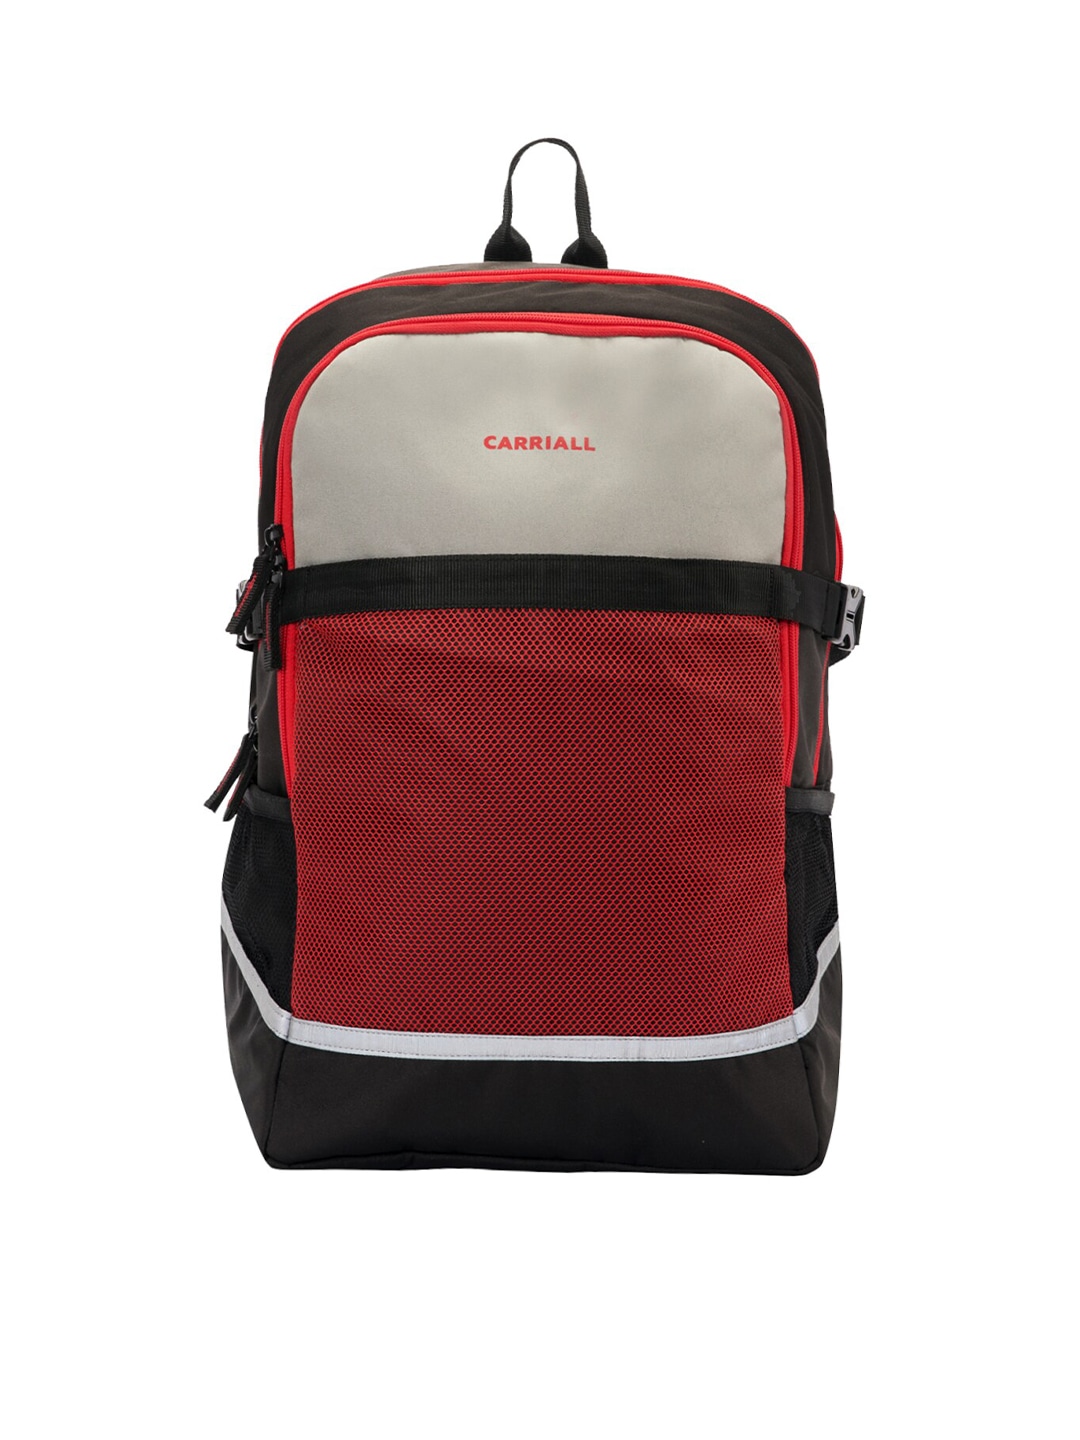 Accessories Backpacks | CARRIALL Unisex Red Colourblocked Active Sports Backpack - ZU62863